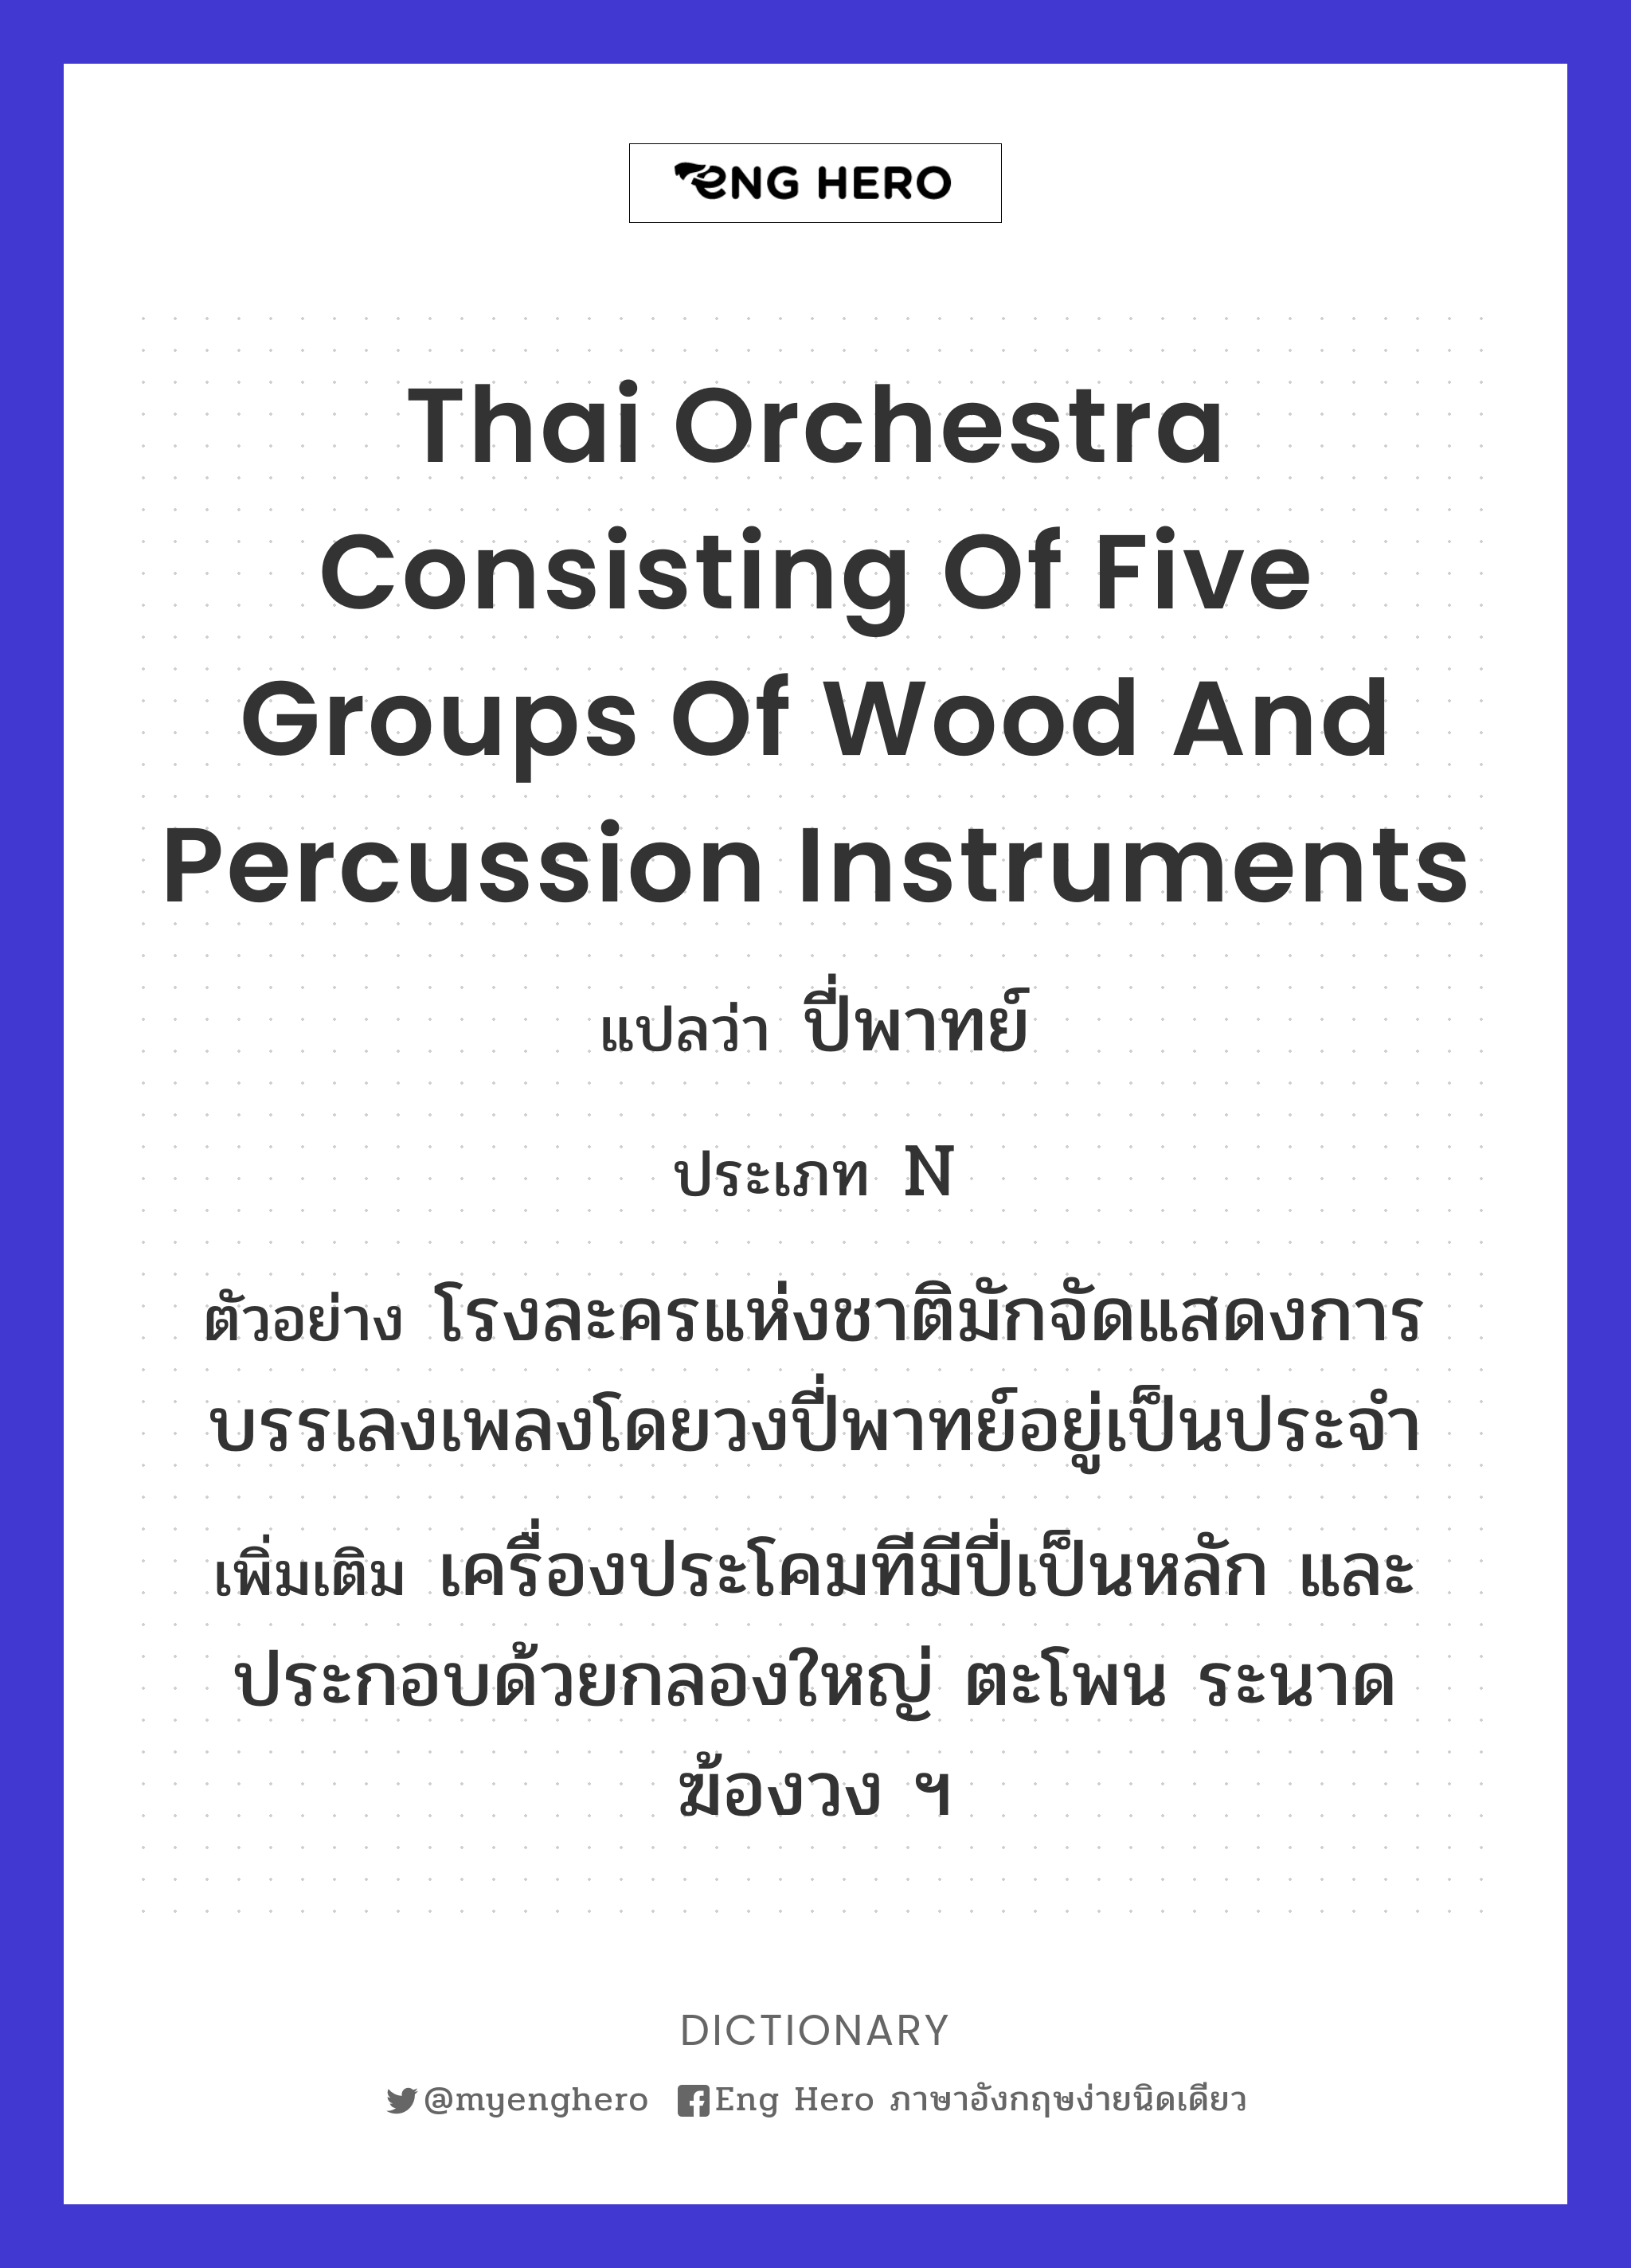 Thai orchestra consisting of five groups of wood and percussion instruments